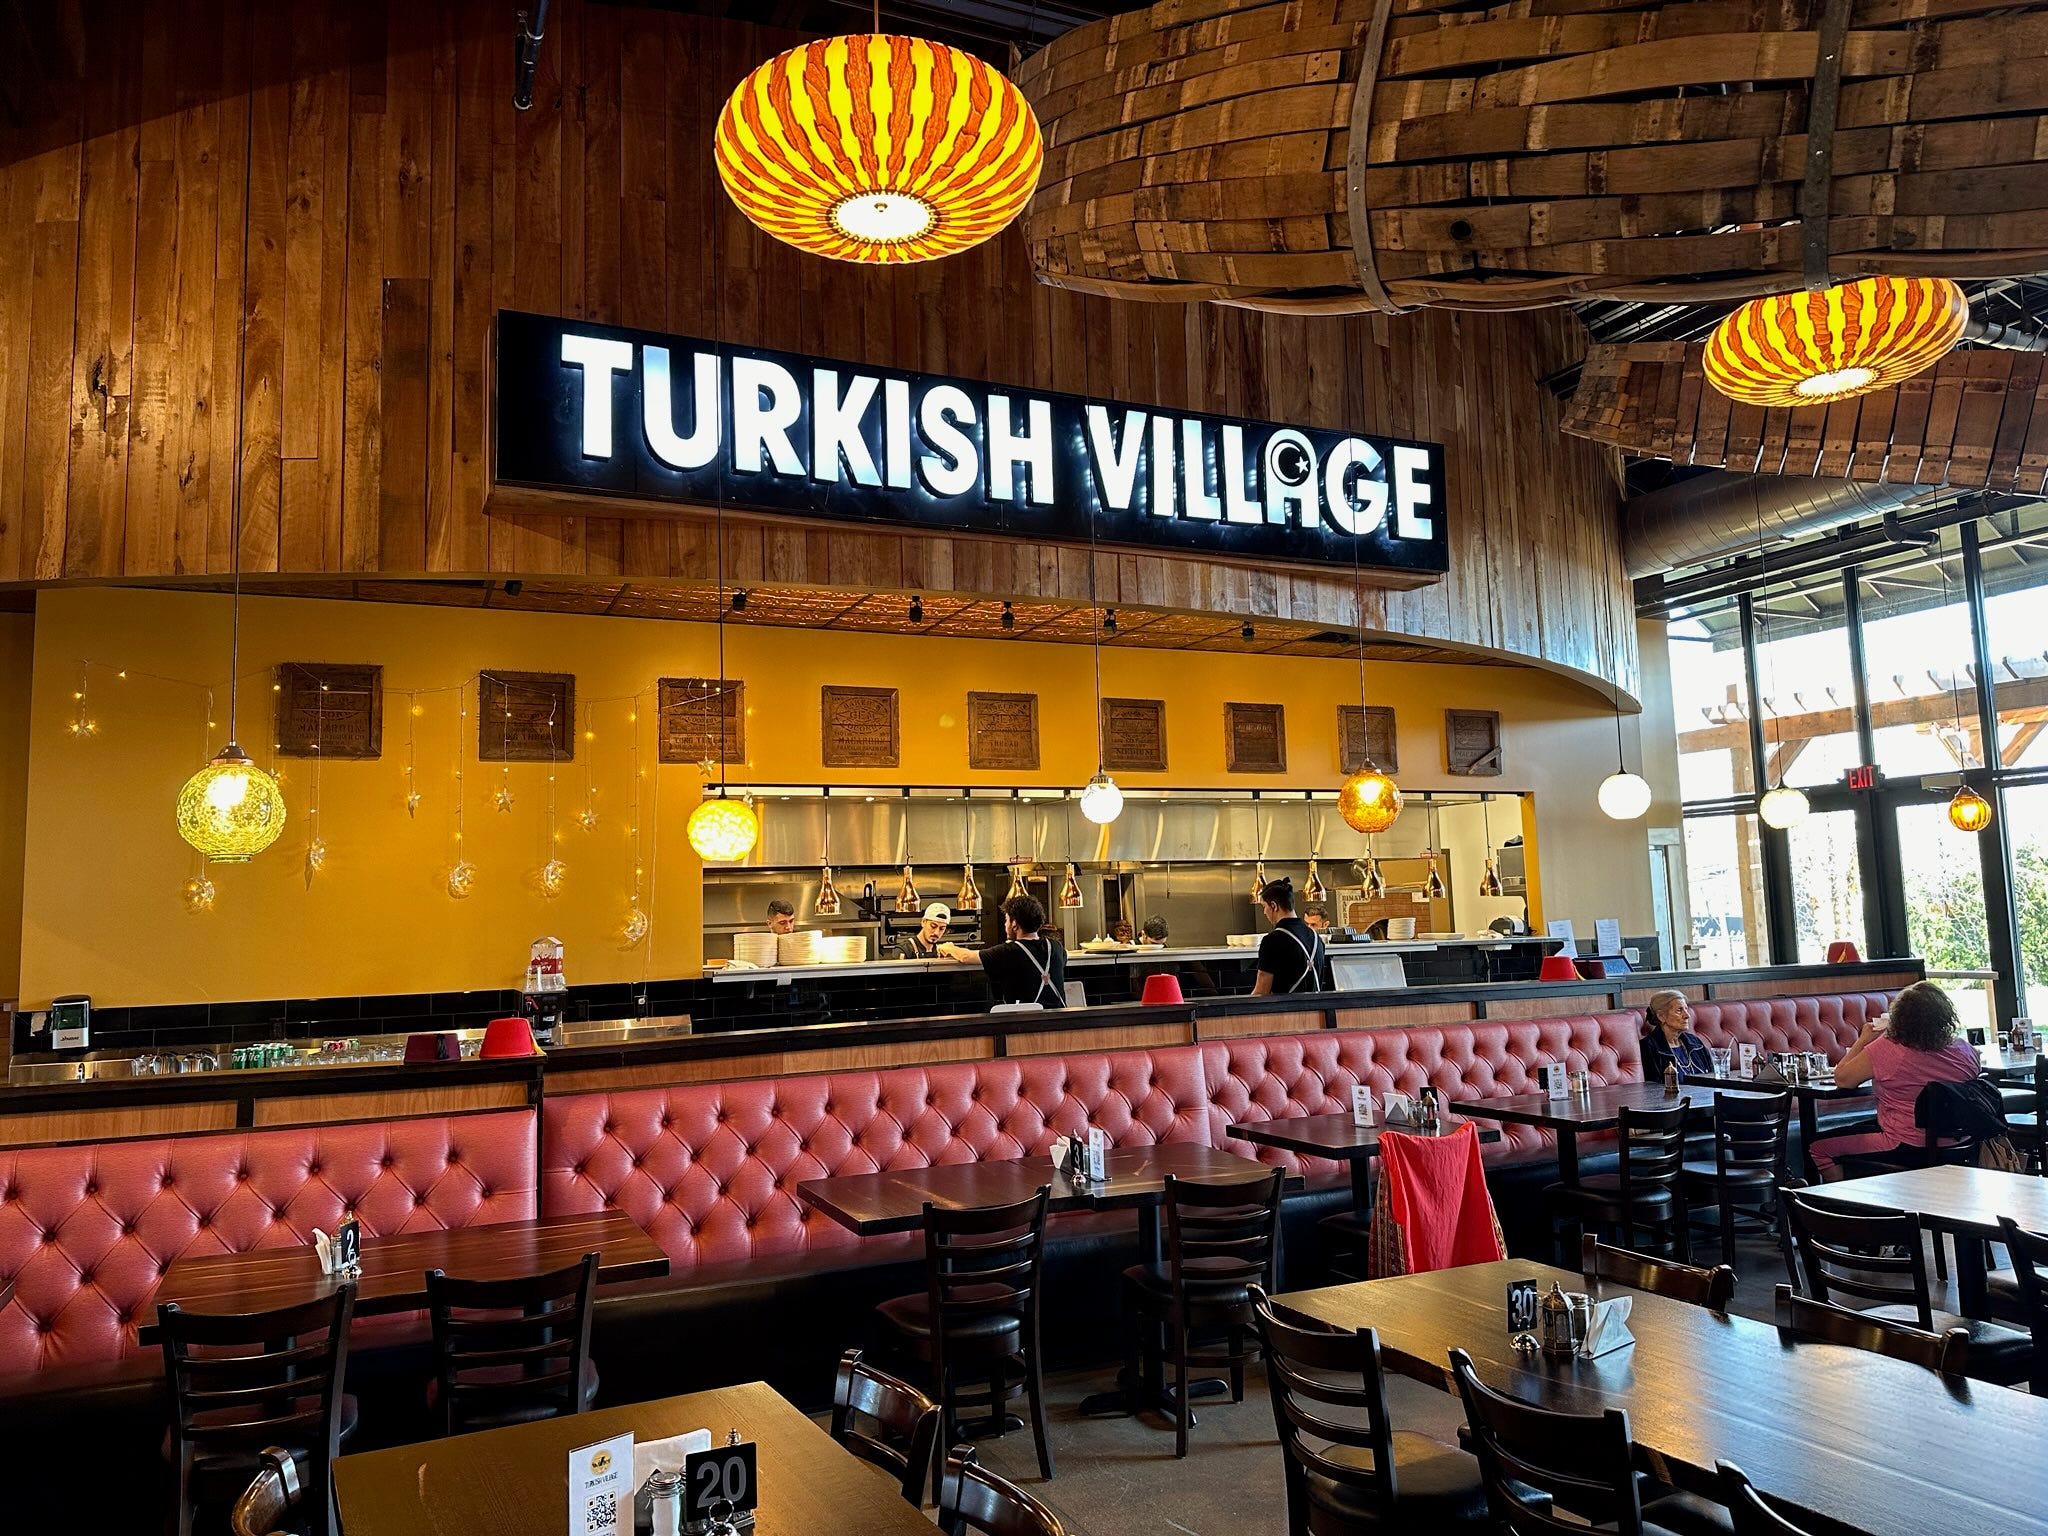 Turkish Village, which has a full menu, plus sweets, coffee, tea and smoothies, is participating in Dearborn Restaurant Week.